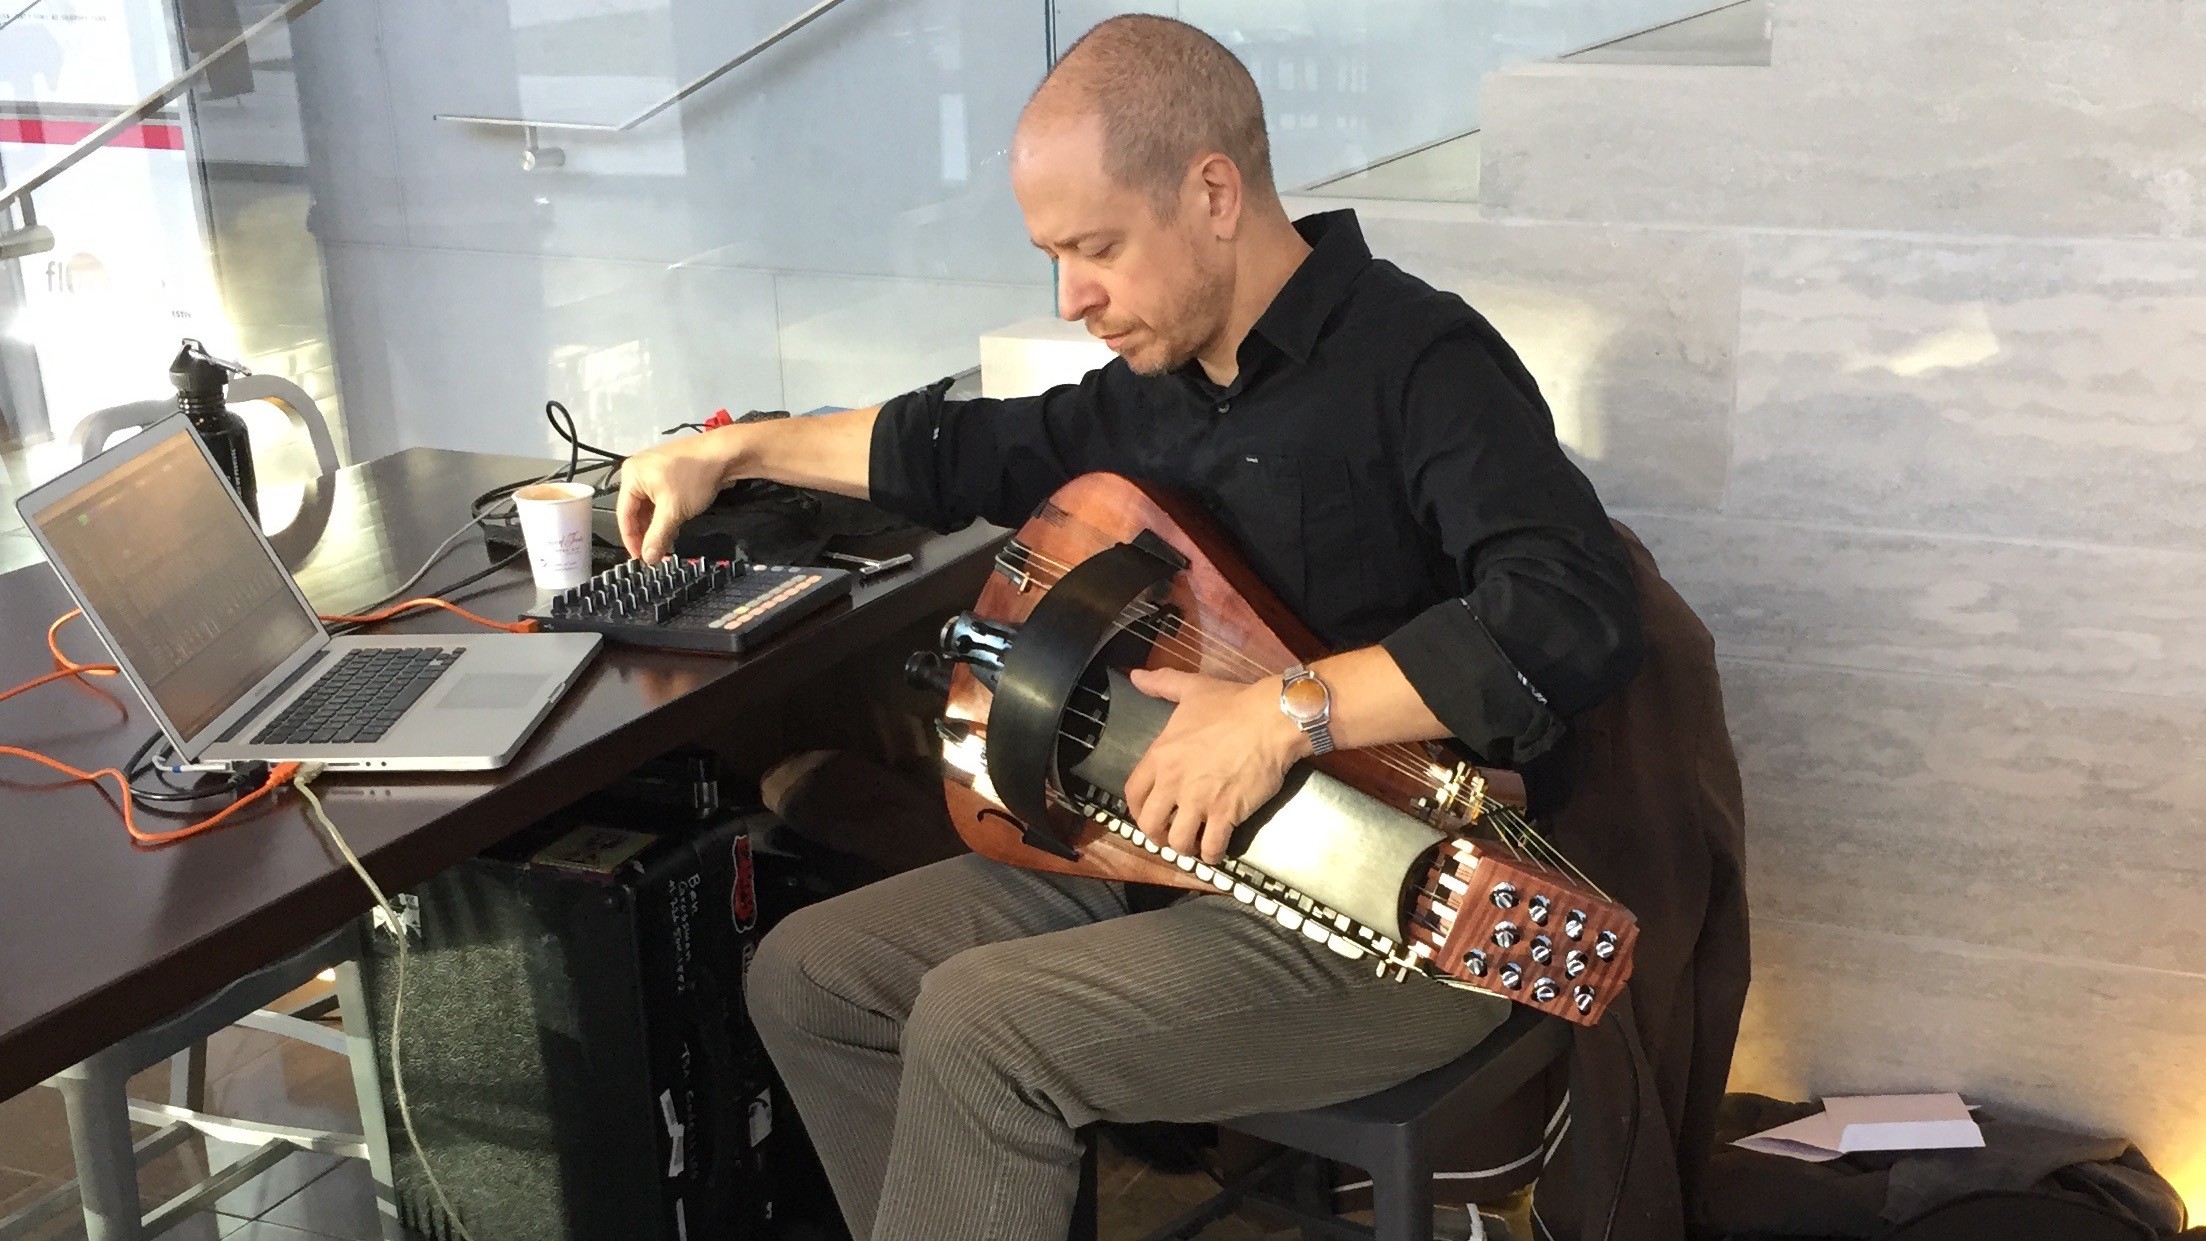 A person holding a hurdy gurdy while manipulating hardware controls on a table top